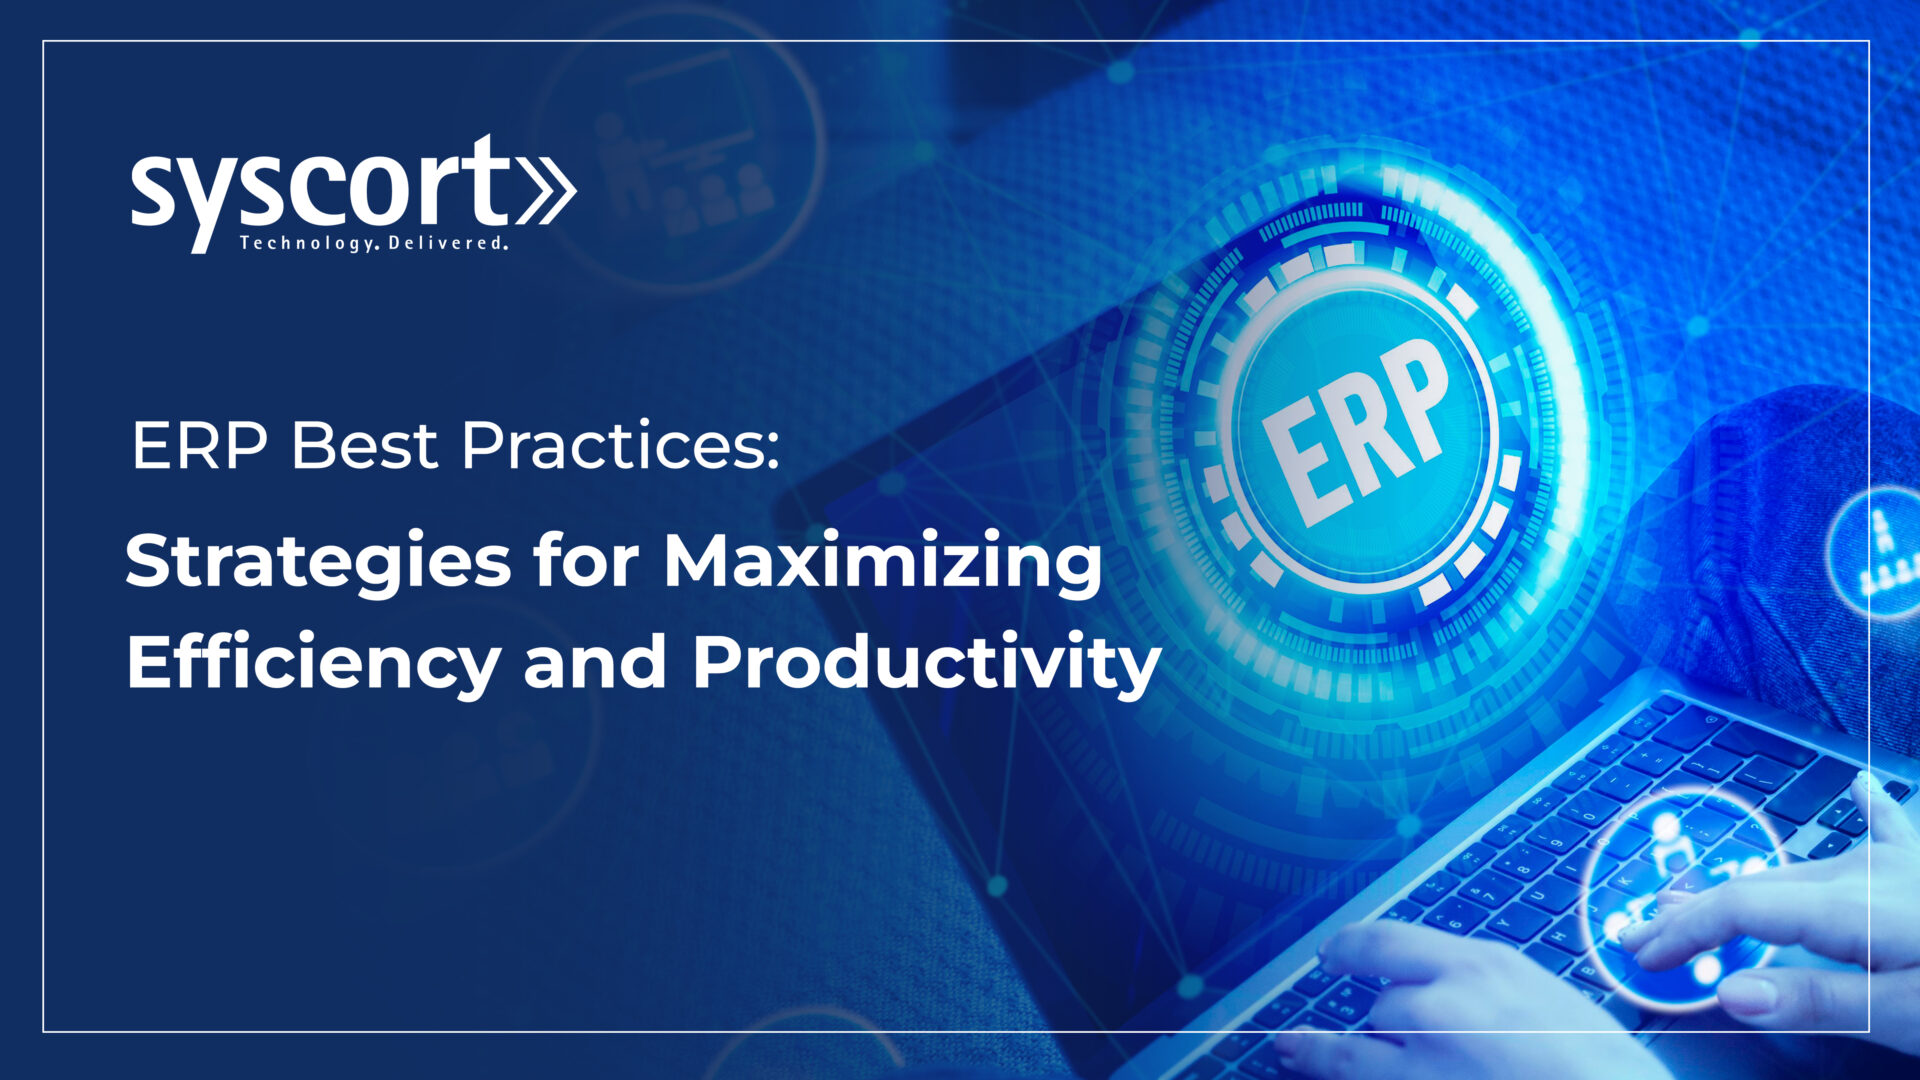 ERP Best Practices: Strategies for Maximizing Efficiency and Productivity